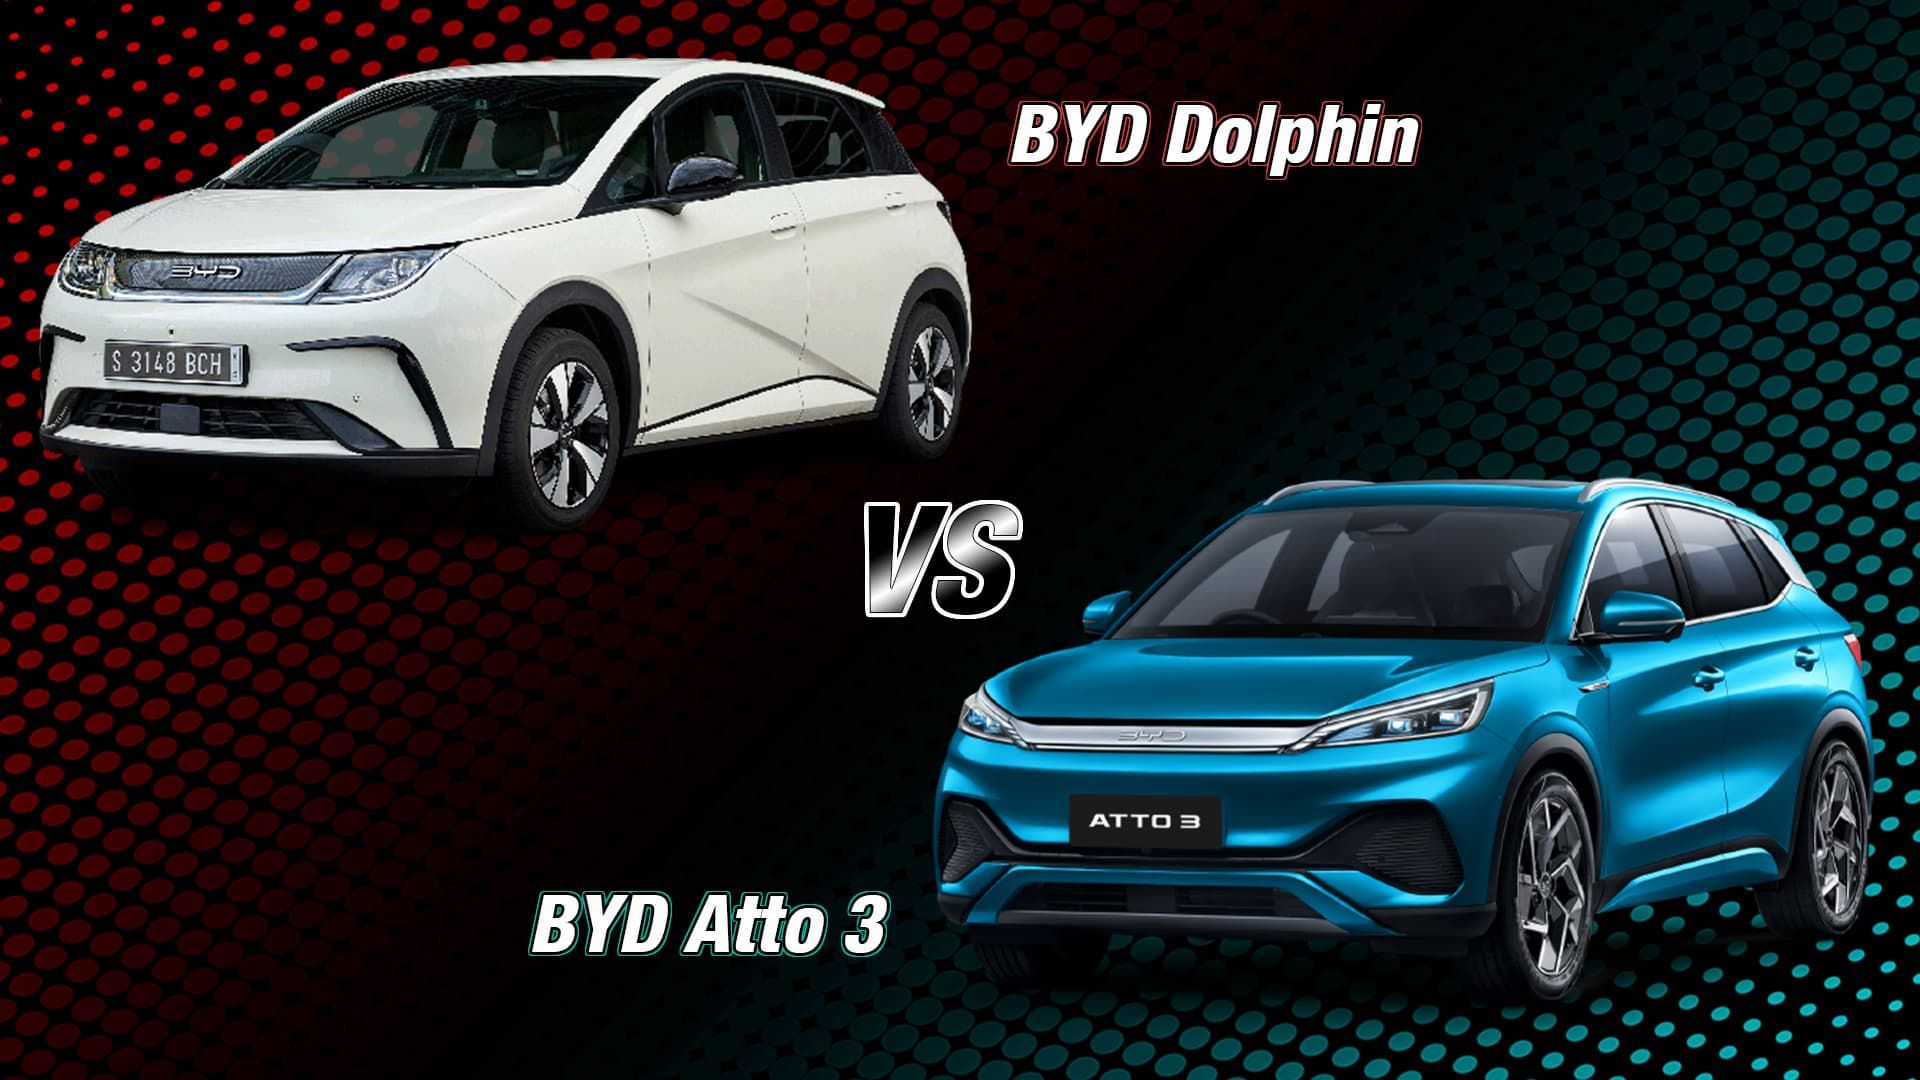 BYD Dolphin vs BYD Atto 3 angle